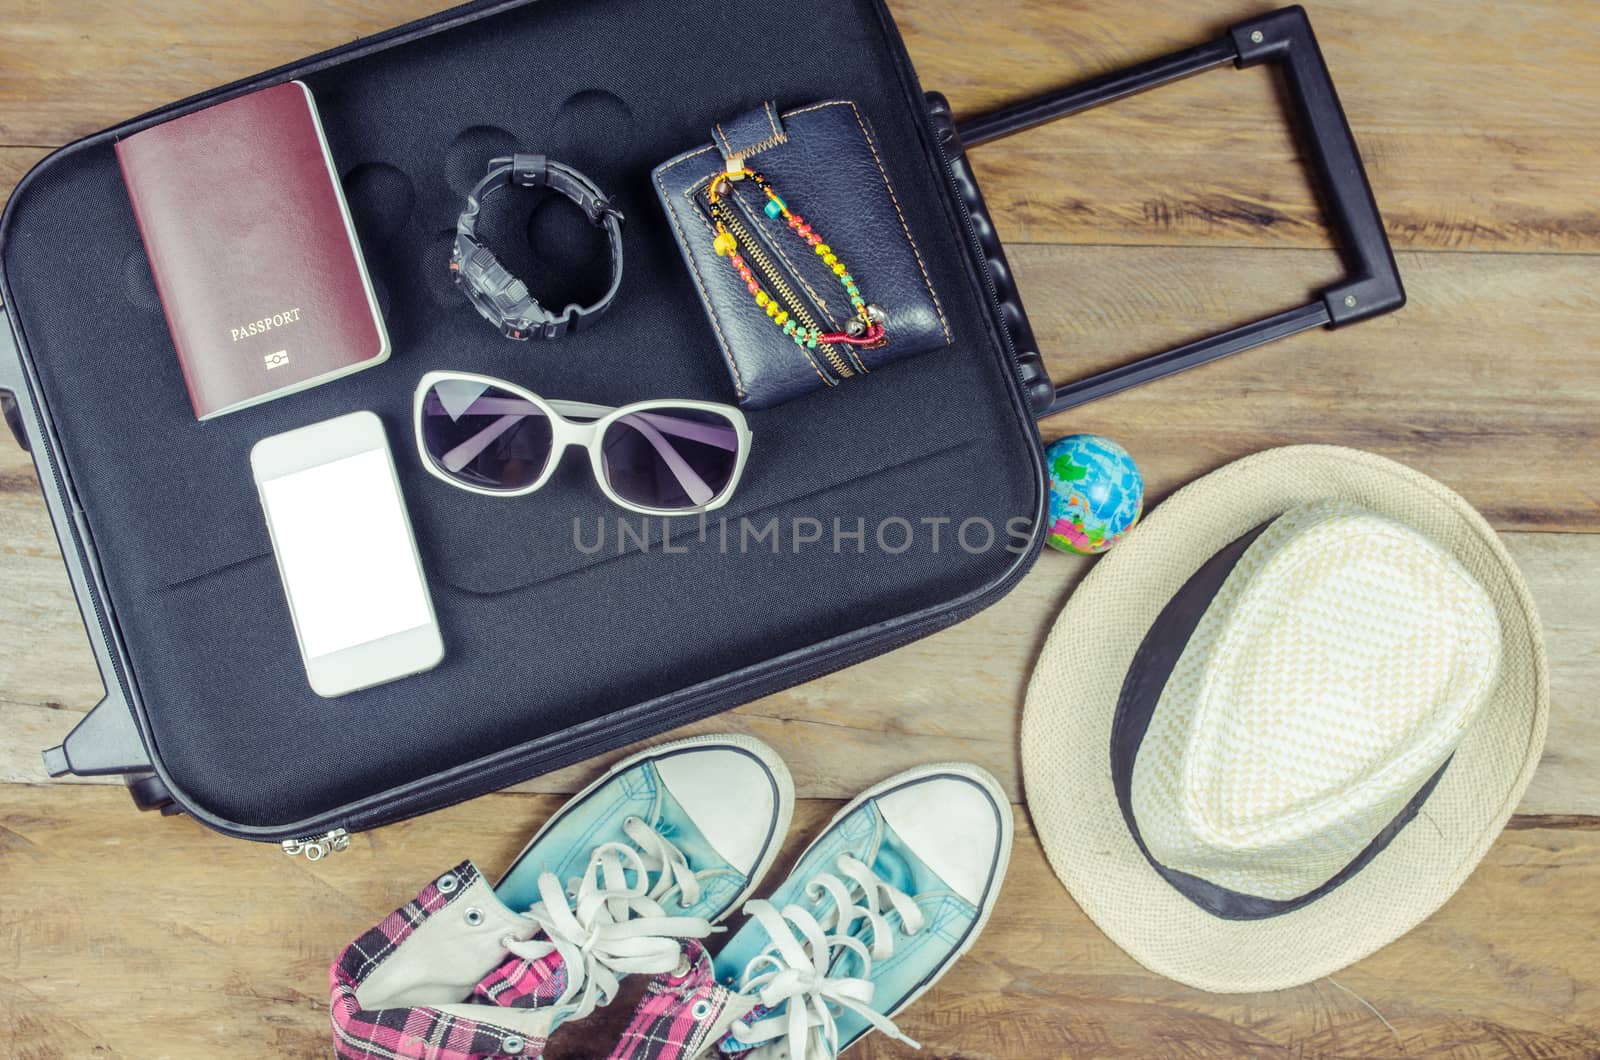 Clothing traveler's Passport, wallet, glasses, watches, smart phone devices, hat, shoes, on a wooden floor on the luggage ready to travel. by photobyphotoboy